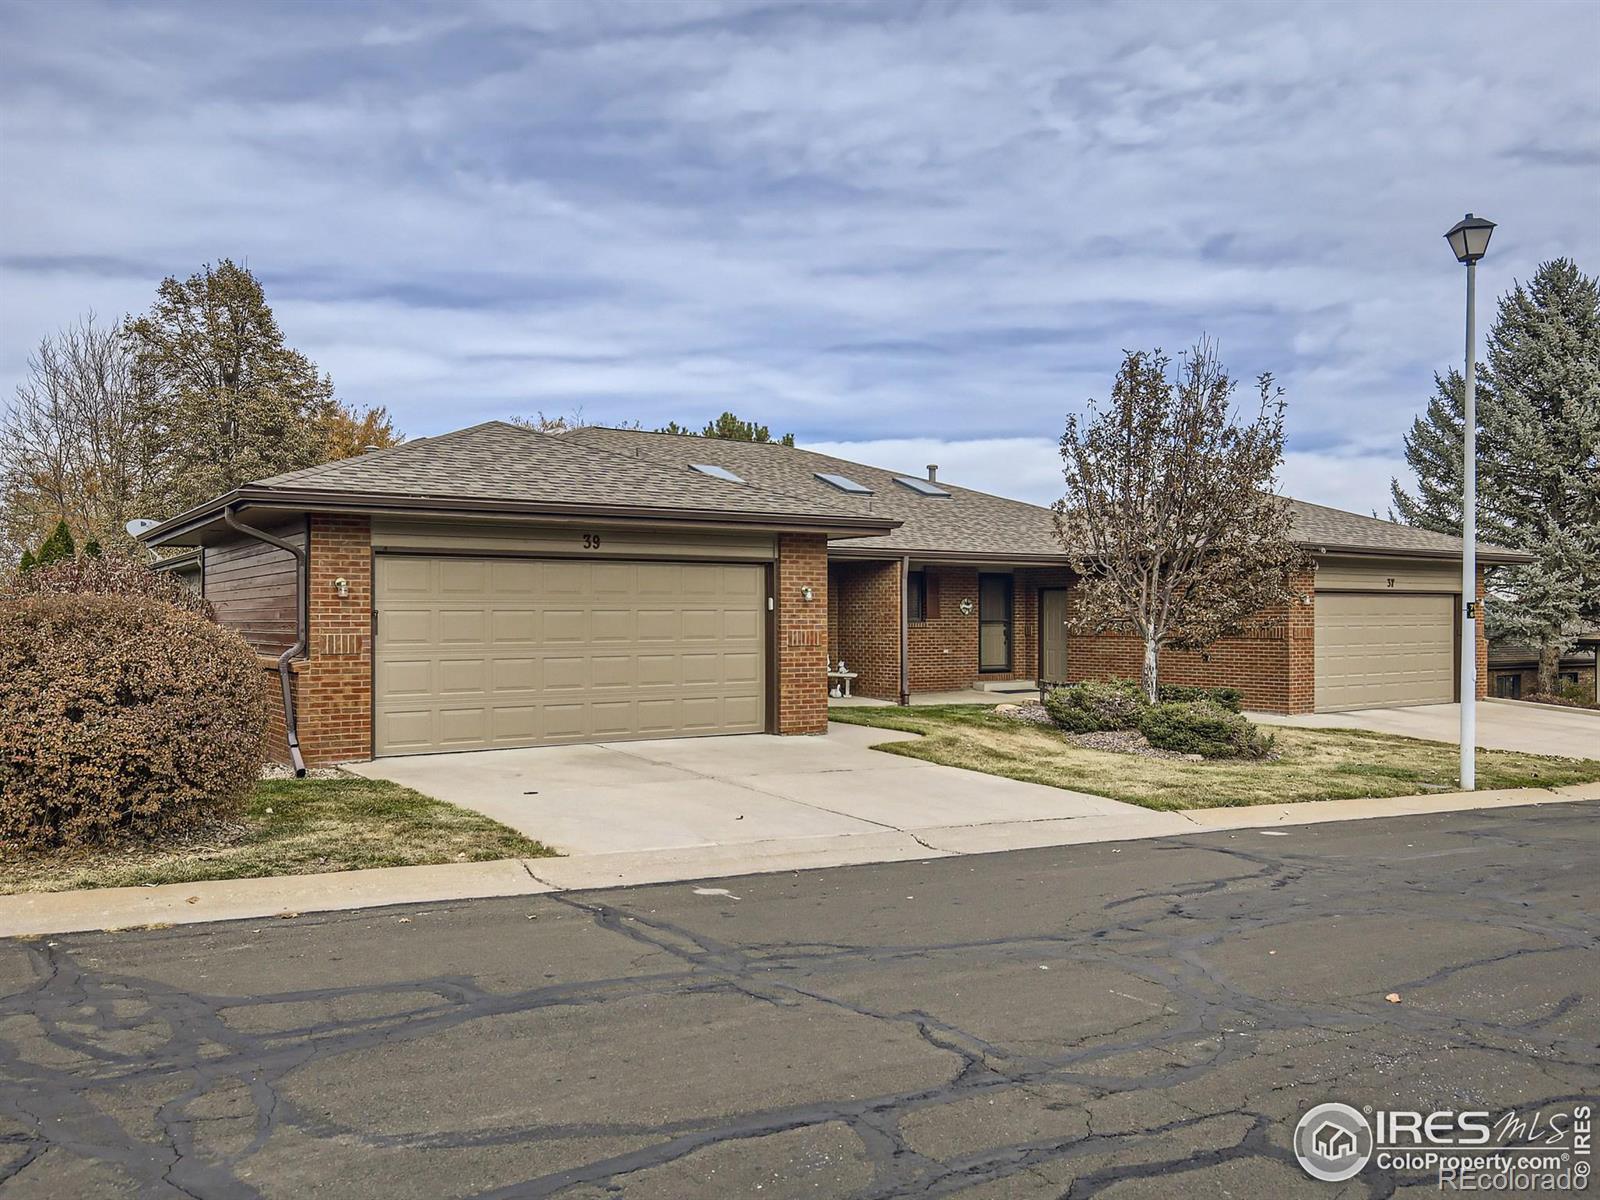 1001  43rd Avenue, greeley MLS: 4567891000849 Beds: 2 Baths: 3 Price: $380,000